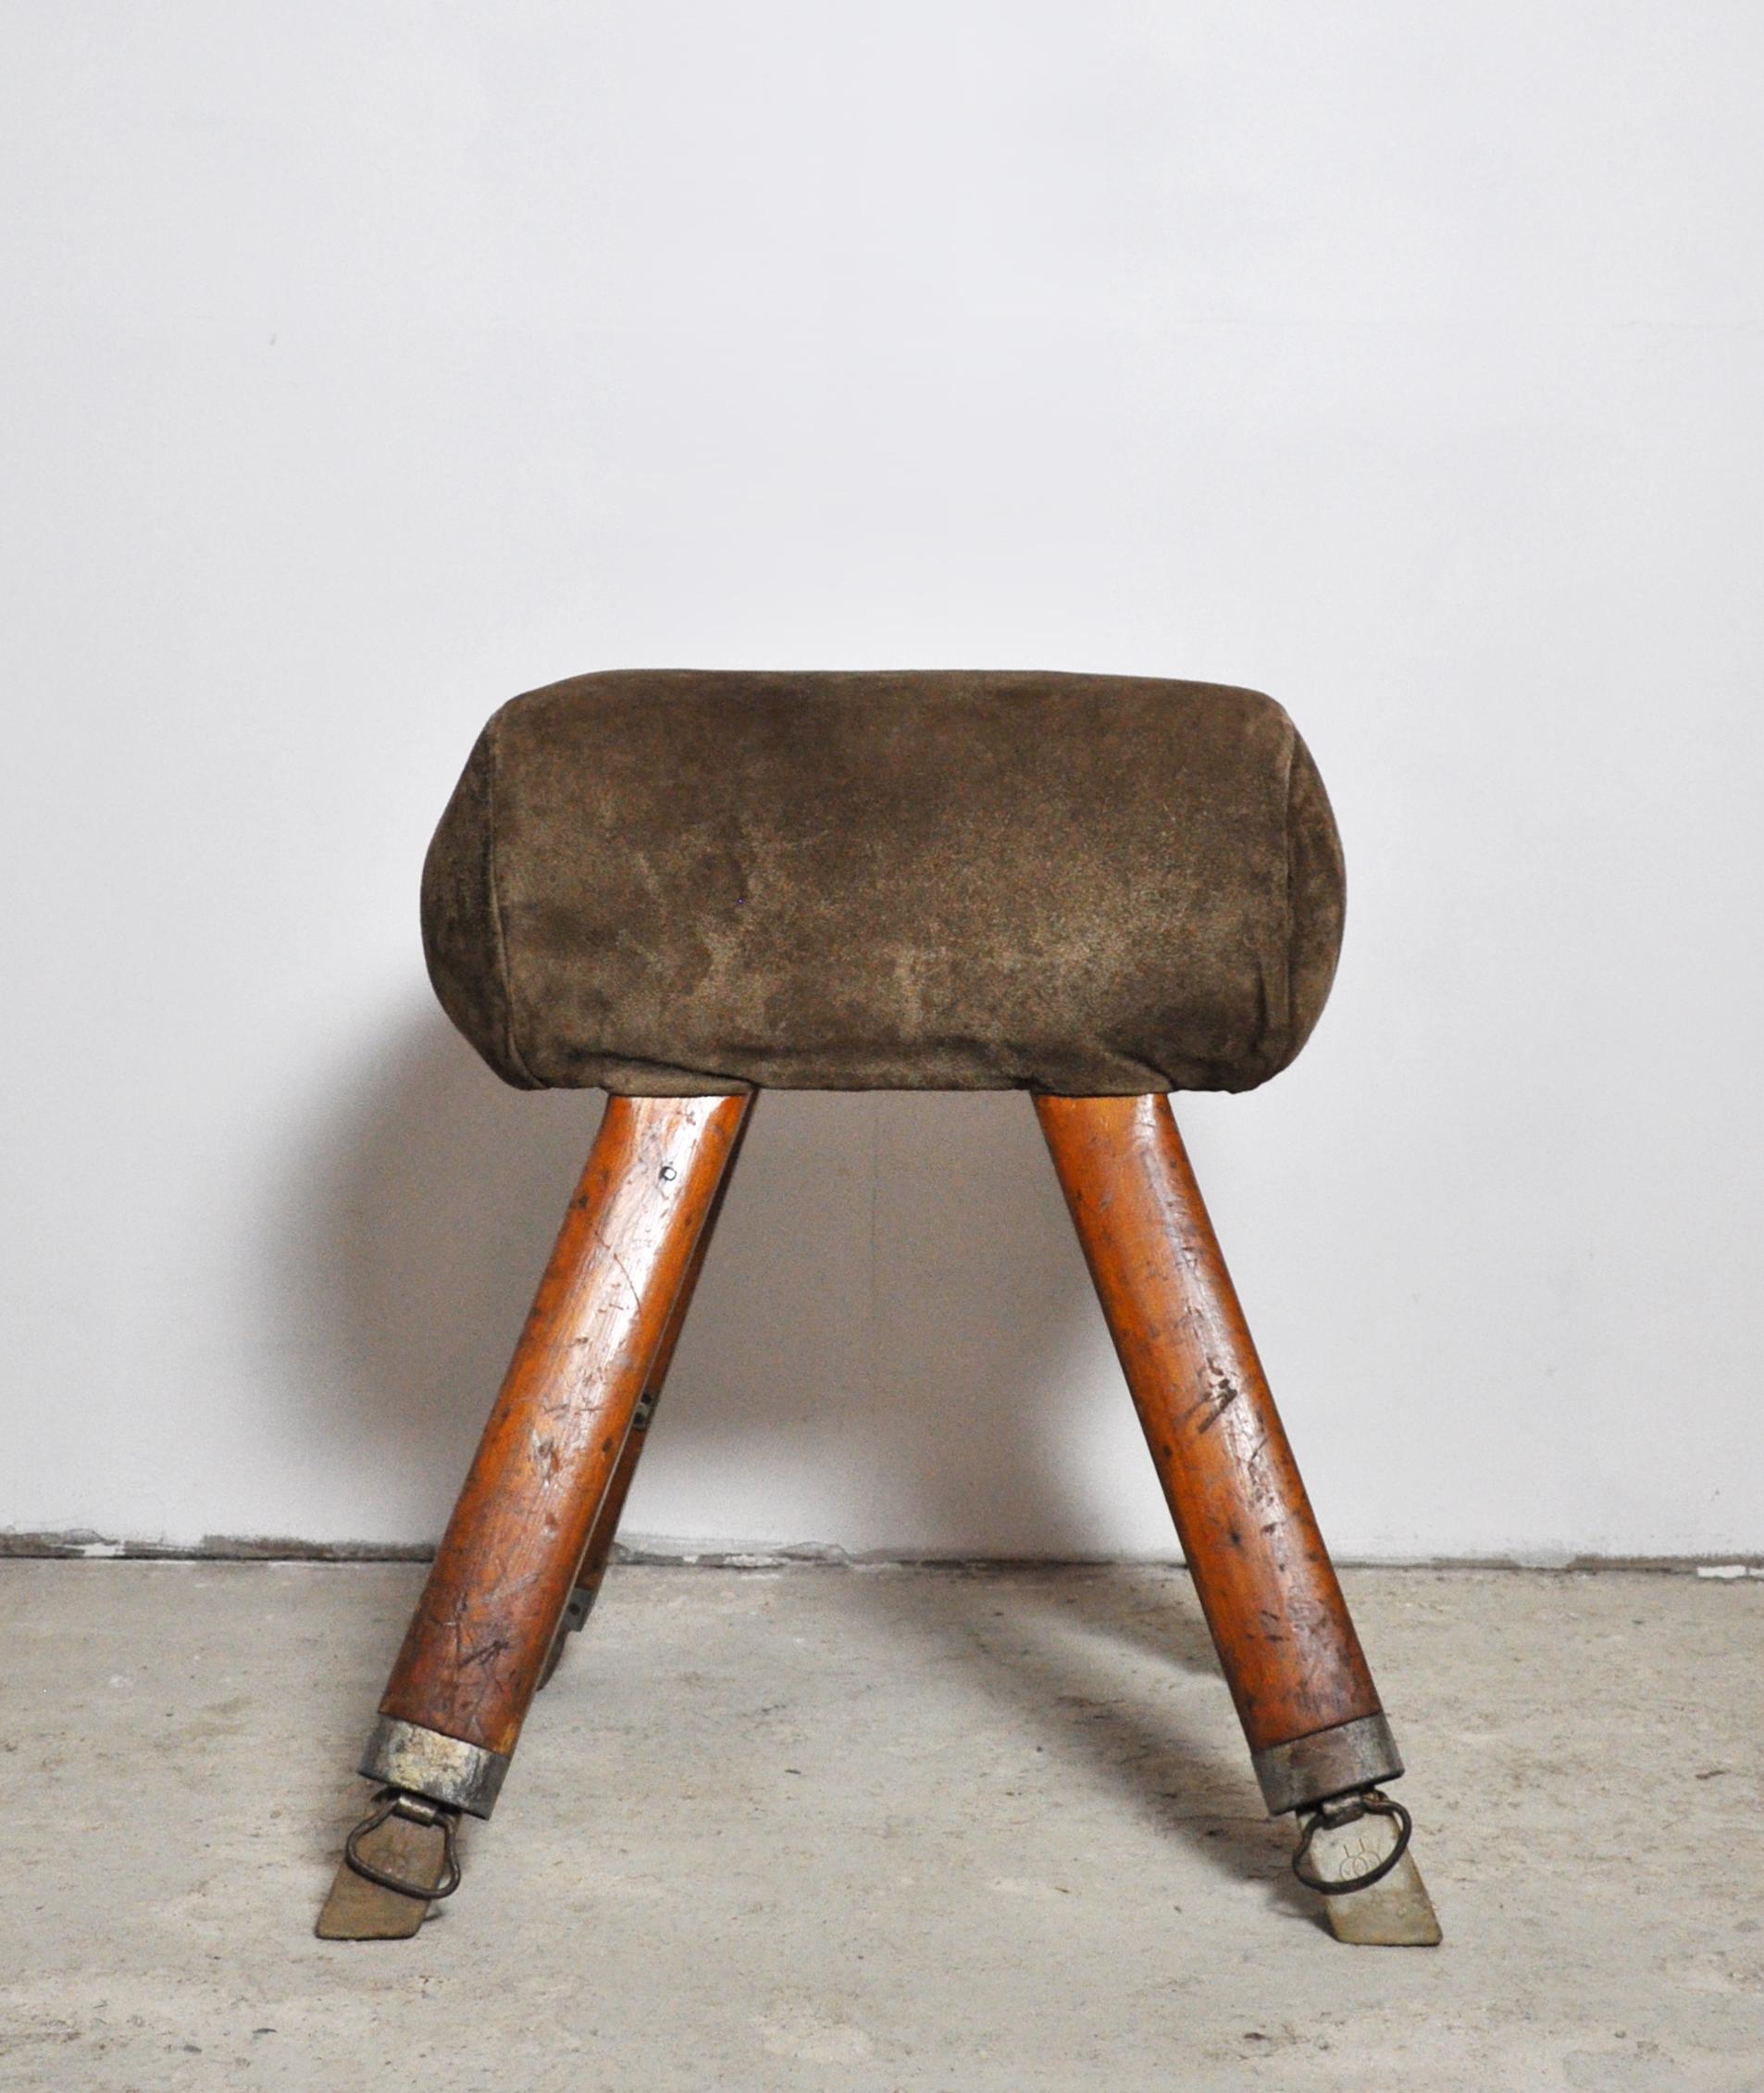 Beautiful and original 20th century gymnastics buck in beautiful suede leather and with fully functional extendable legs. 

This vintage pommel horse is very sturdy and beautifully made in suede and pinewood. It is signed 'VGS' on the feet. The